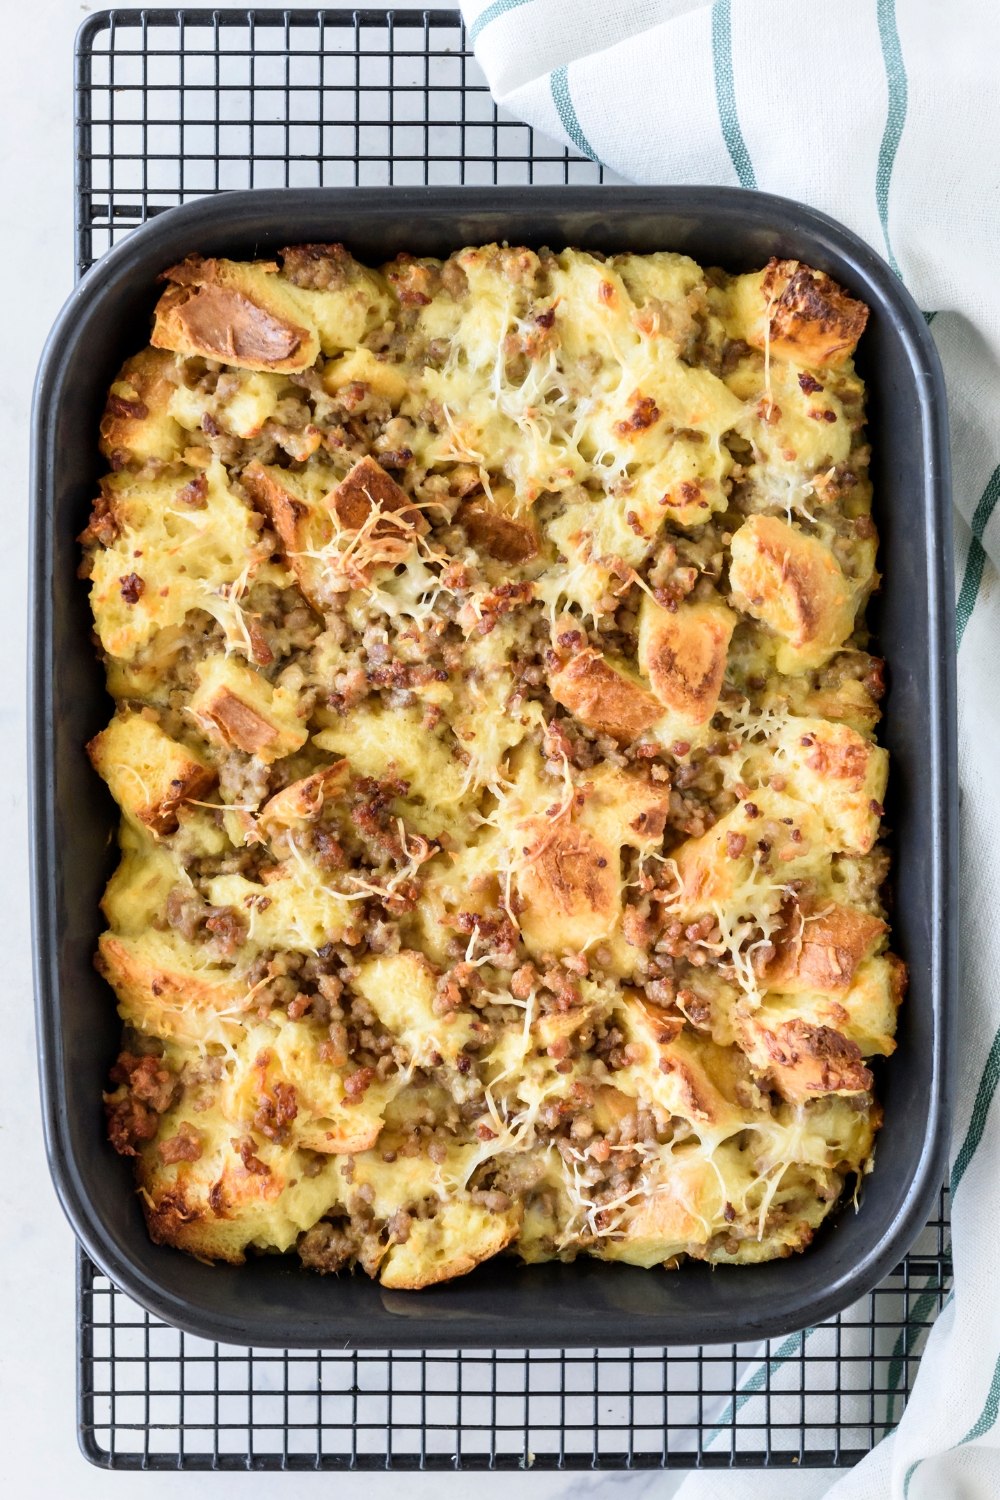 A baking dish filled with freshly baked breakfast casserole that's resting on a cooling rack.